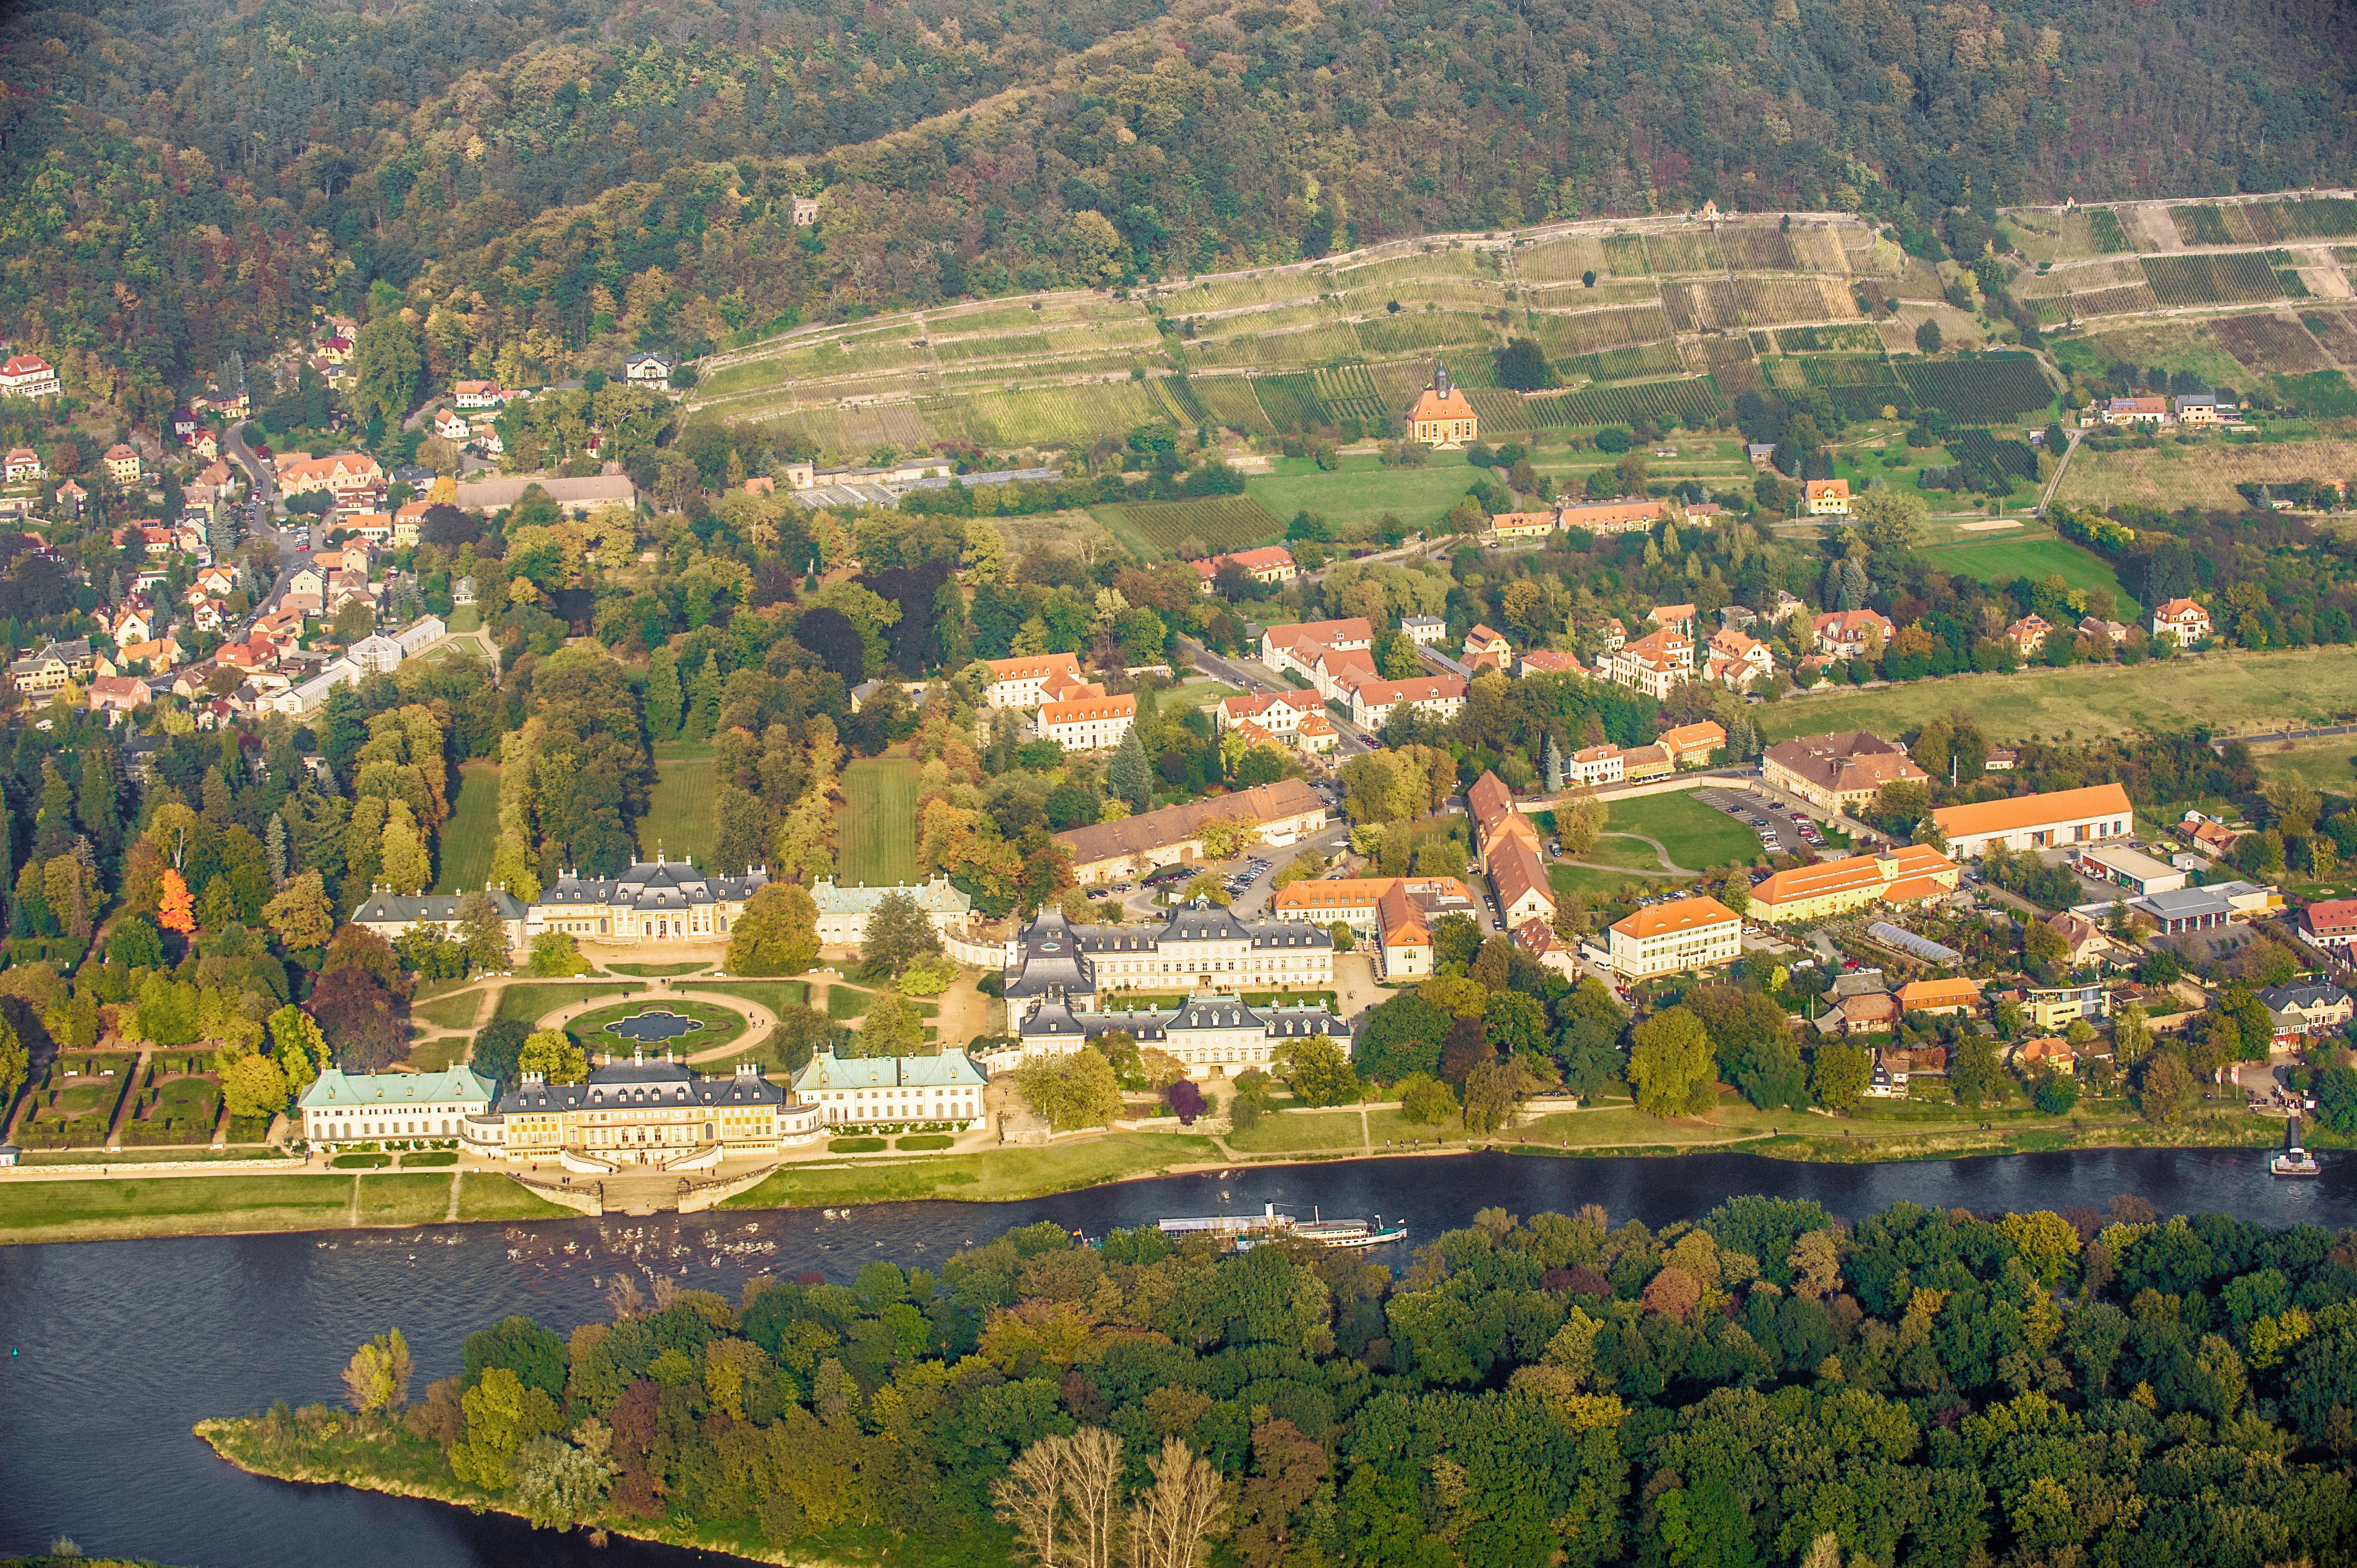 Aerial view of Pillnitz, castle park, Elbe, HTW buildings, residential buildings, vineyard, forest and meadows.